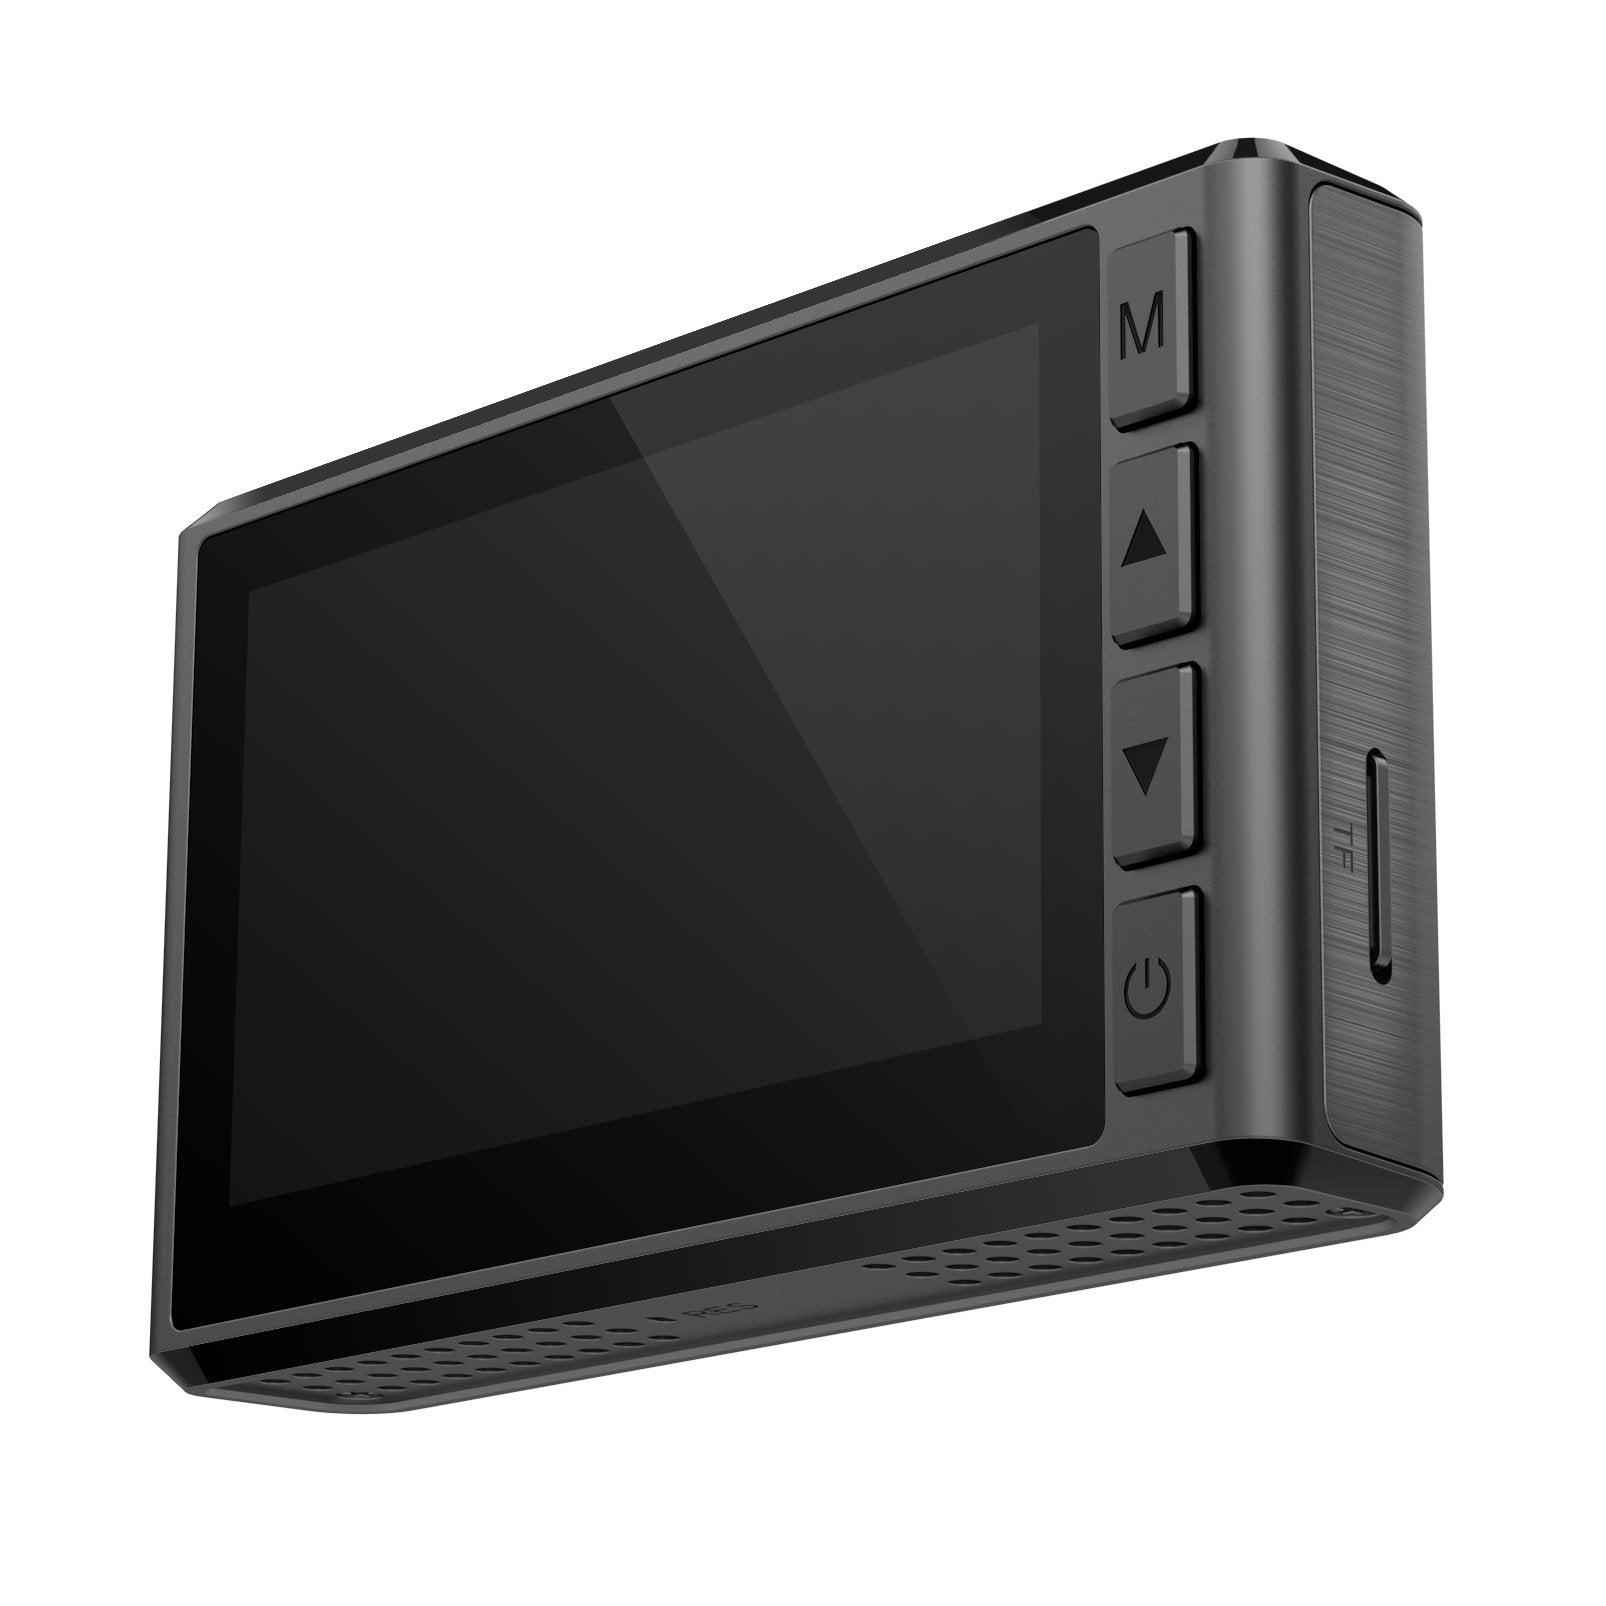 Agri-Farming 2K Pinnacle Touch-Screen Dash Cam w/ WIFI! Record in up to 2K Video Resolution!